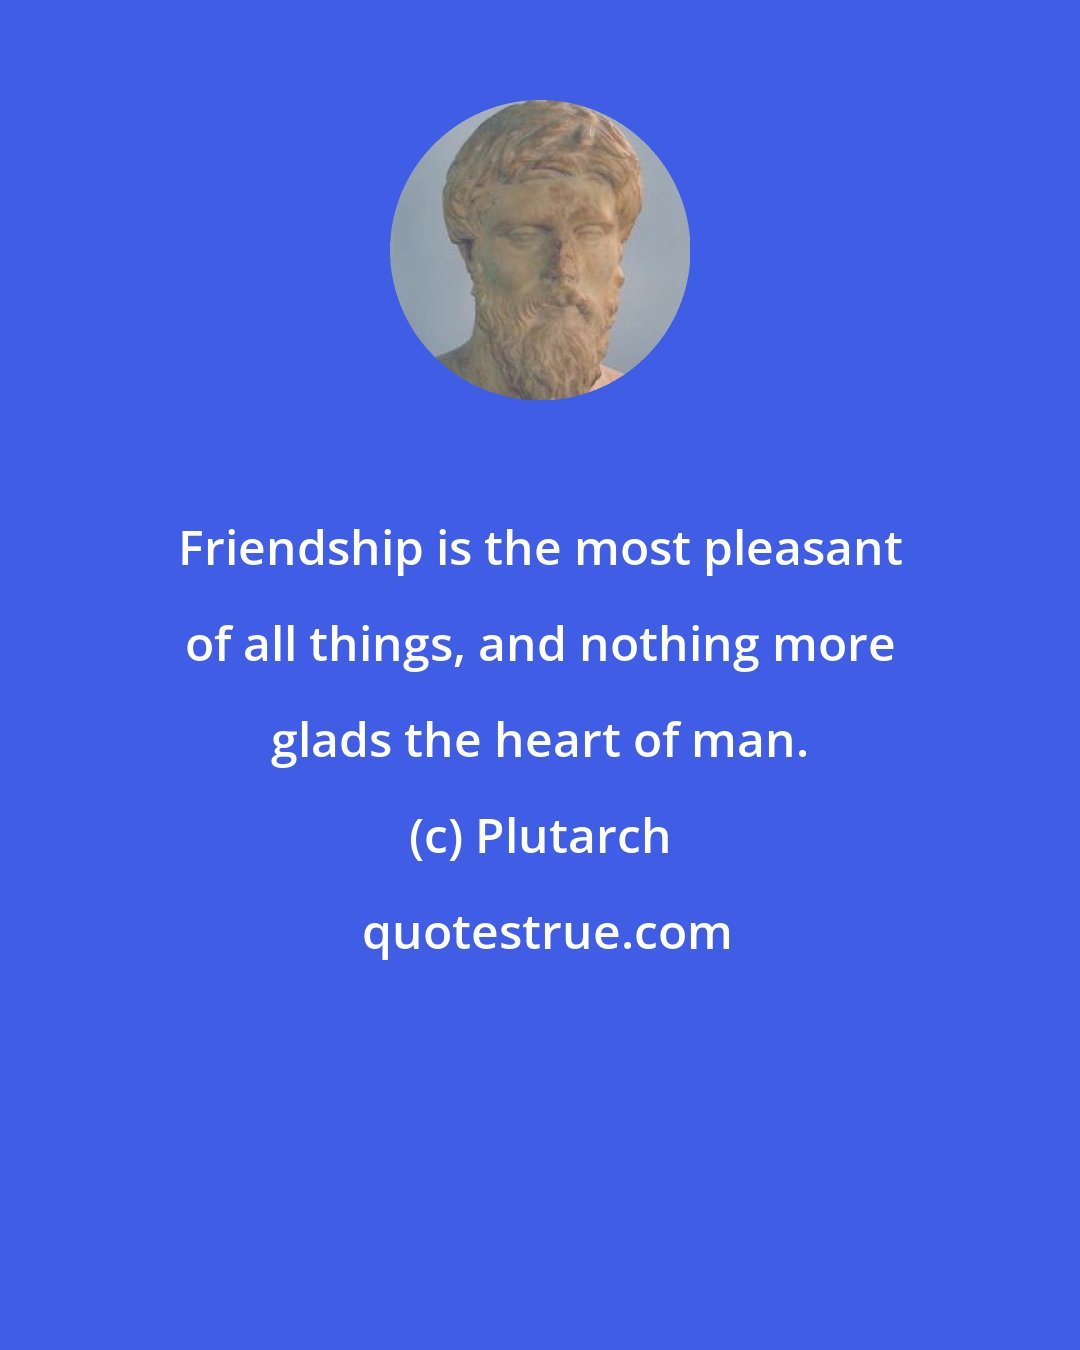 Plutarch: Friendship is the most pleasant of all things, and nothing more glads the heart of man.